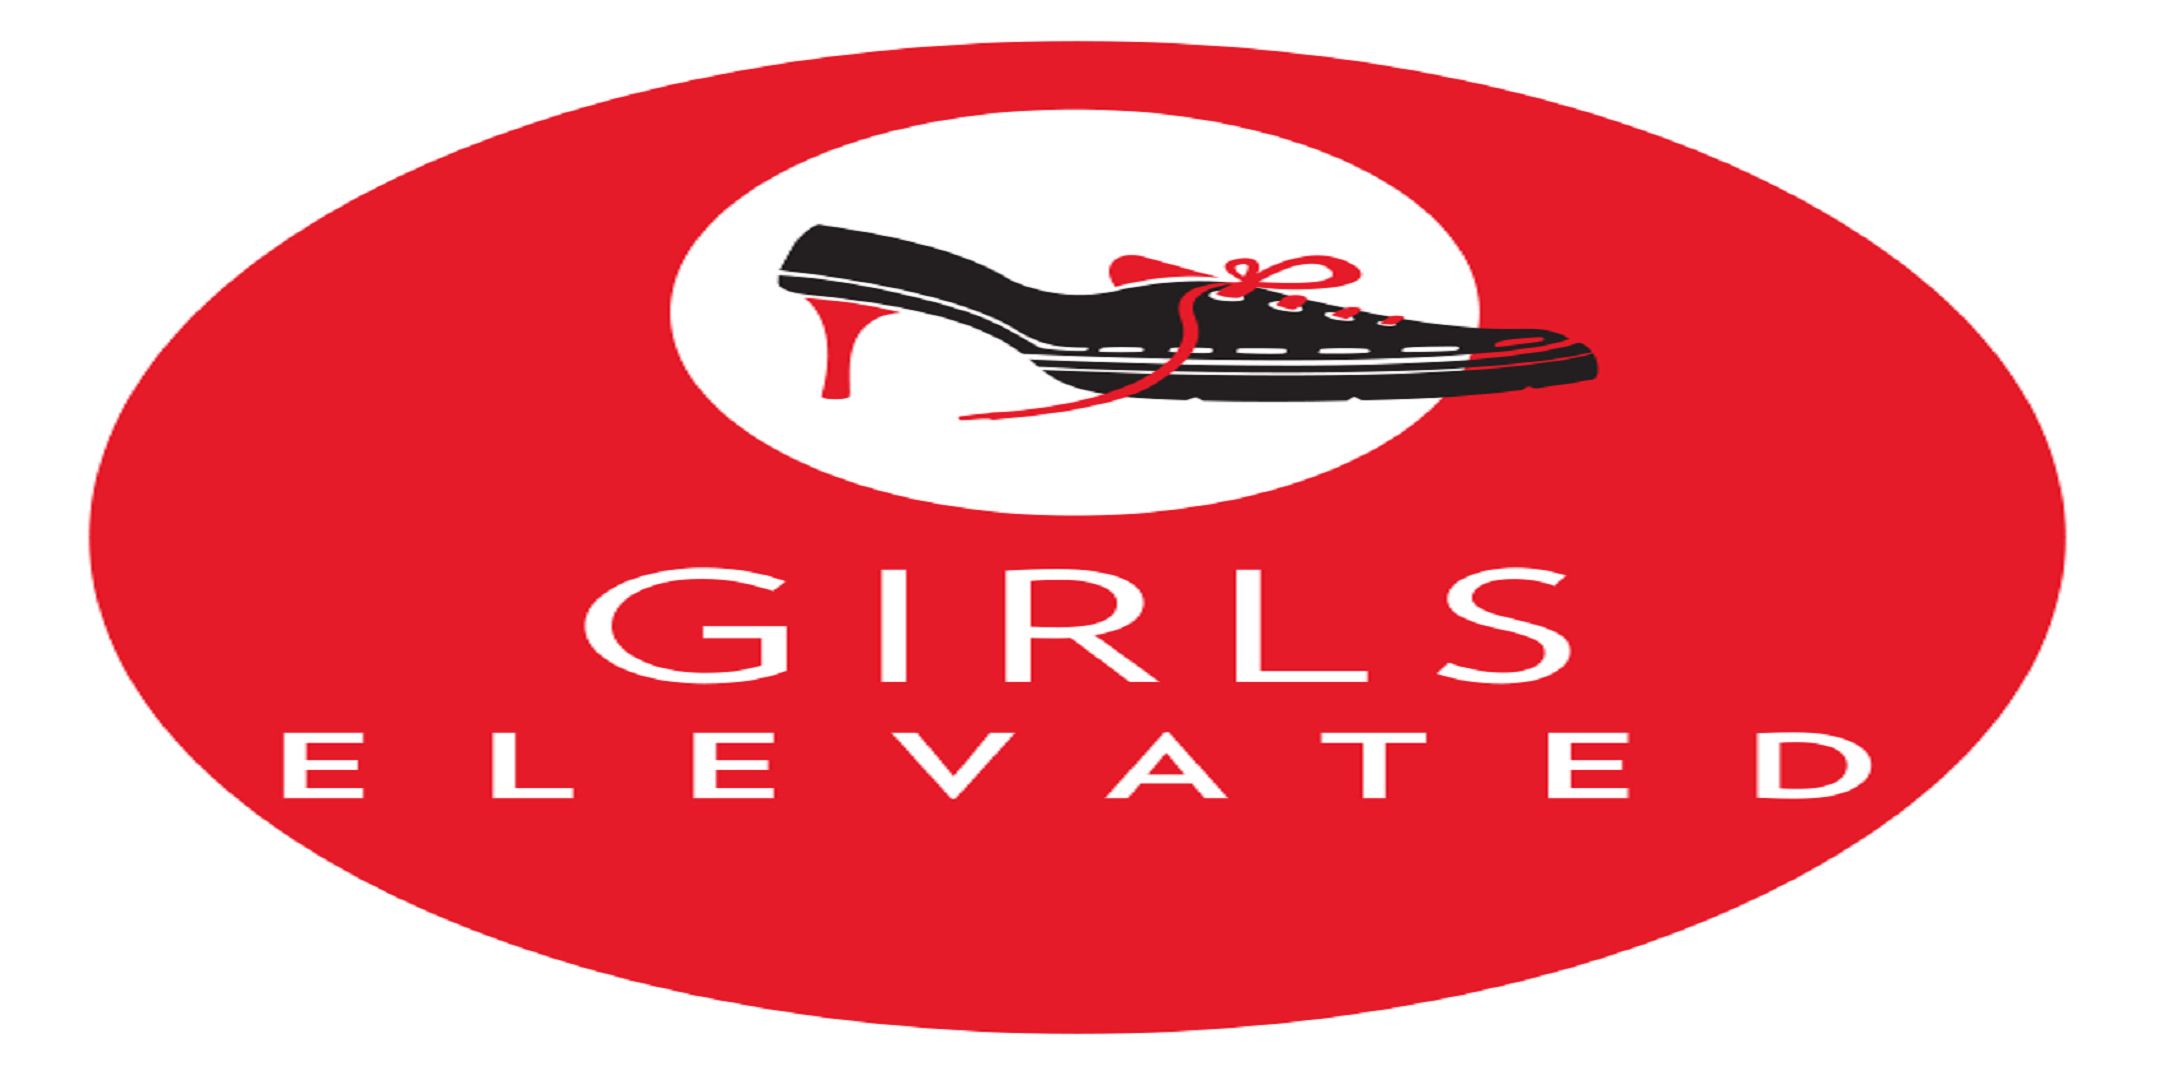 Girls Elevated 2020 - An Event to Empower Tweens and Teens